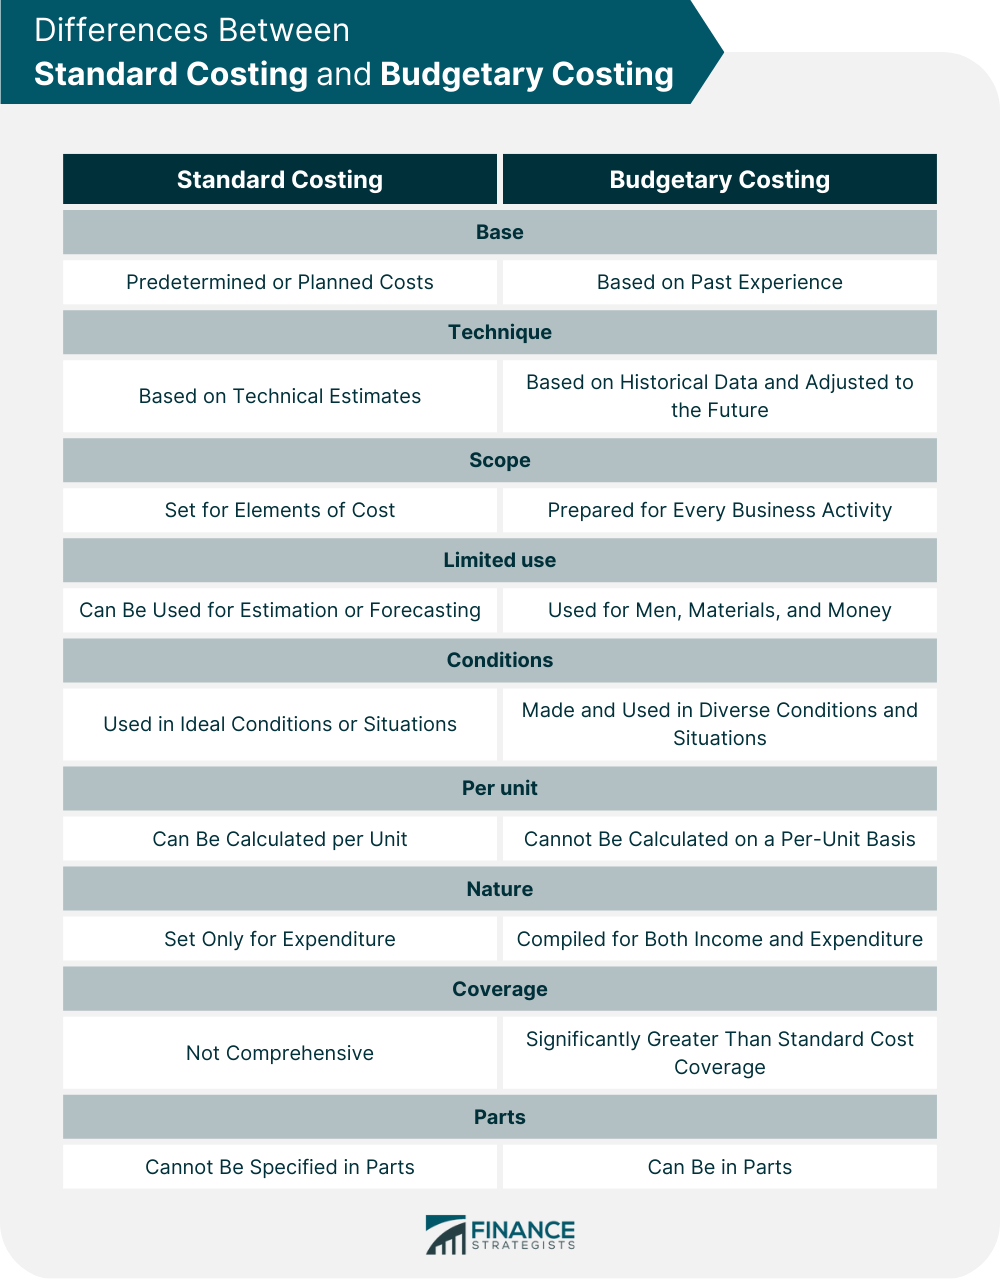 Differences Between Standard Costing and Budgetary Costing